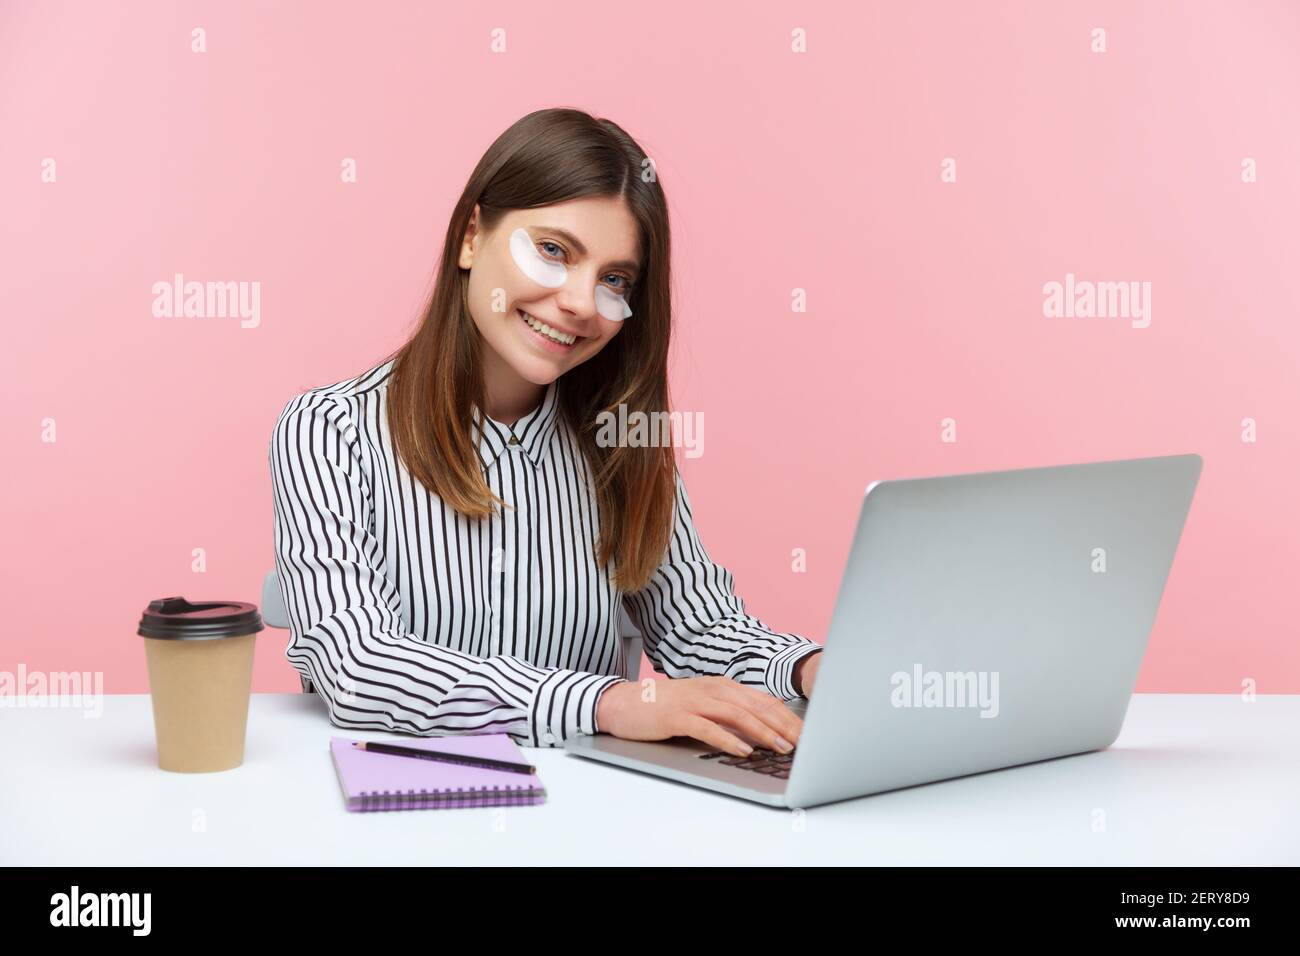 Smiling brunette business woman in striped shirt working on laptop sitting at home office with eye patches, good mood. Indoor studio shot isolated on Stock Photo